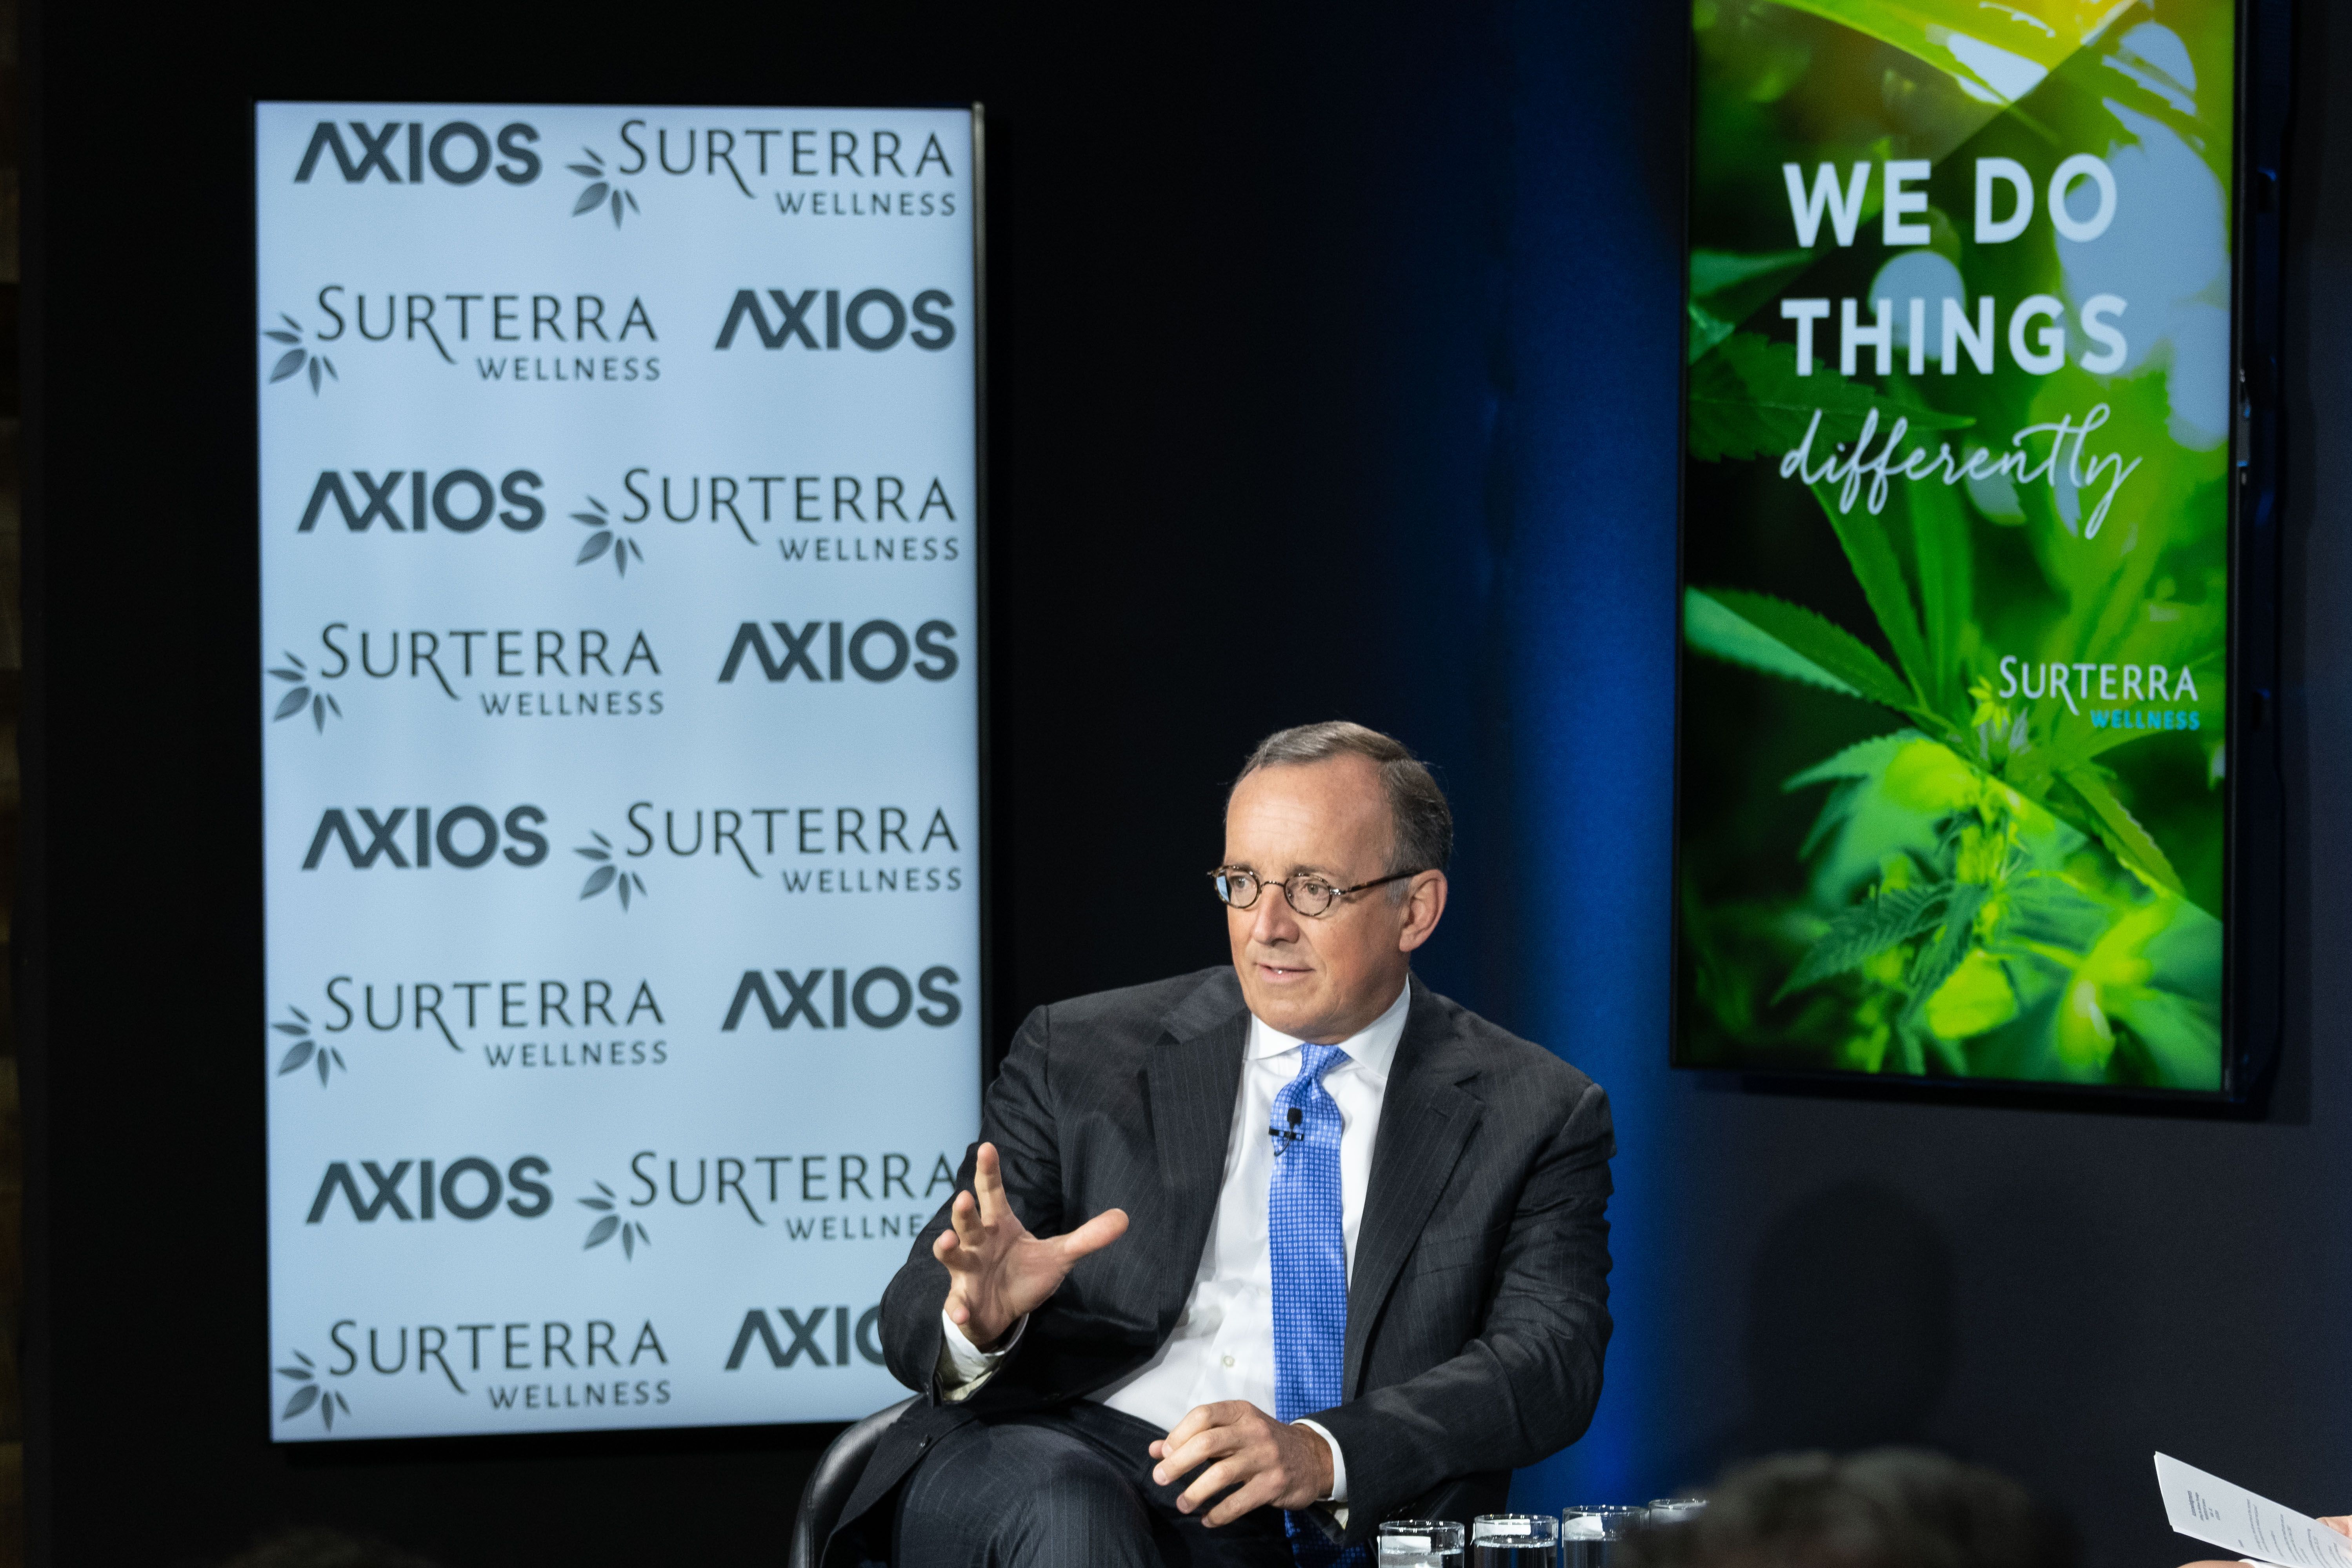 Beau Wrigley, CEO of Surterra Wellness, on the Axios stage